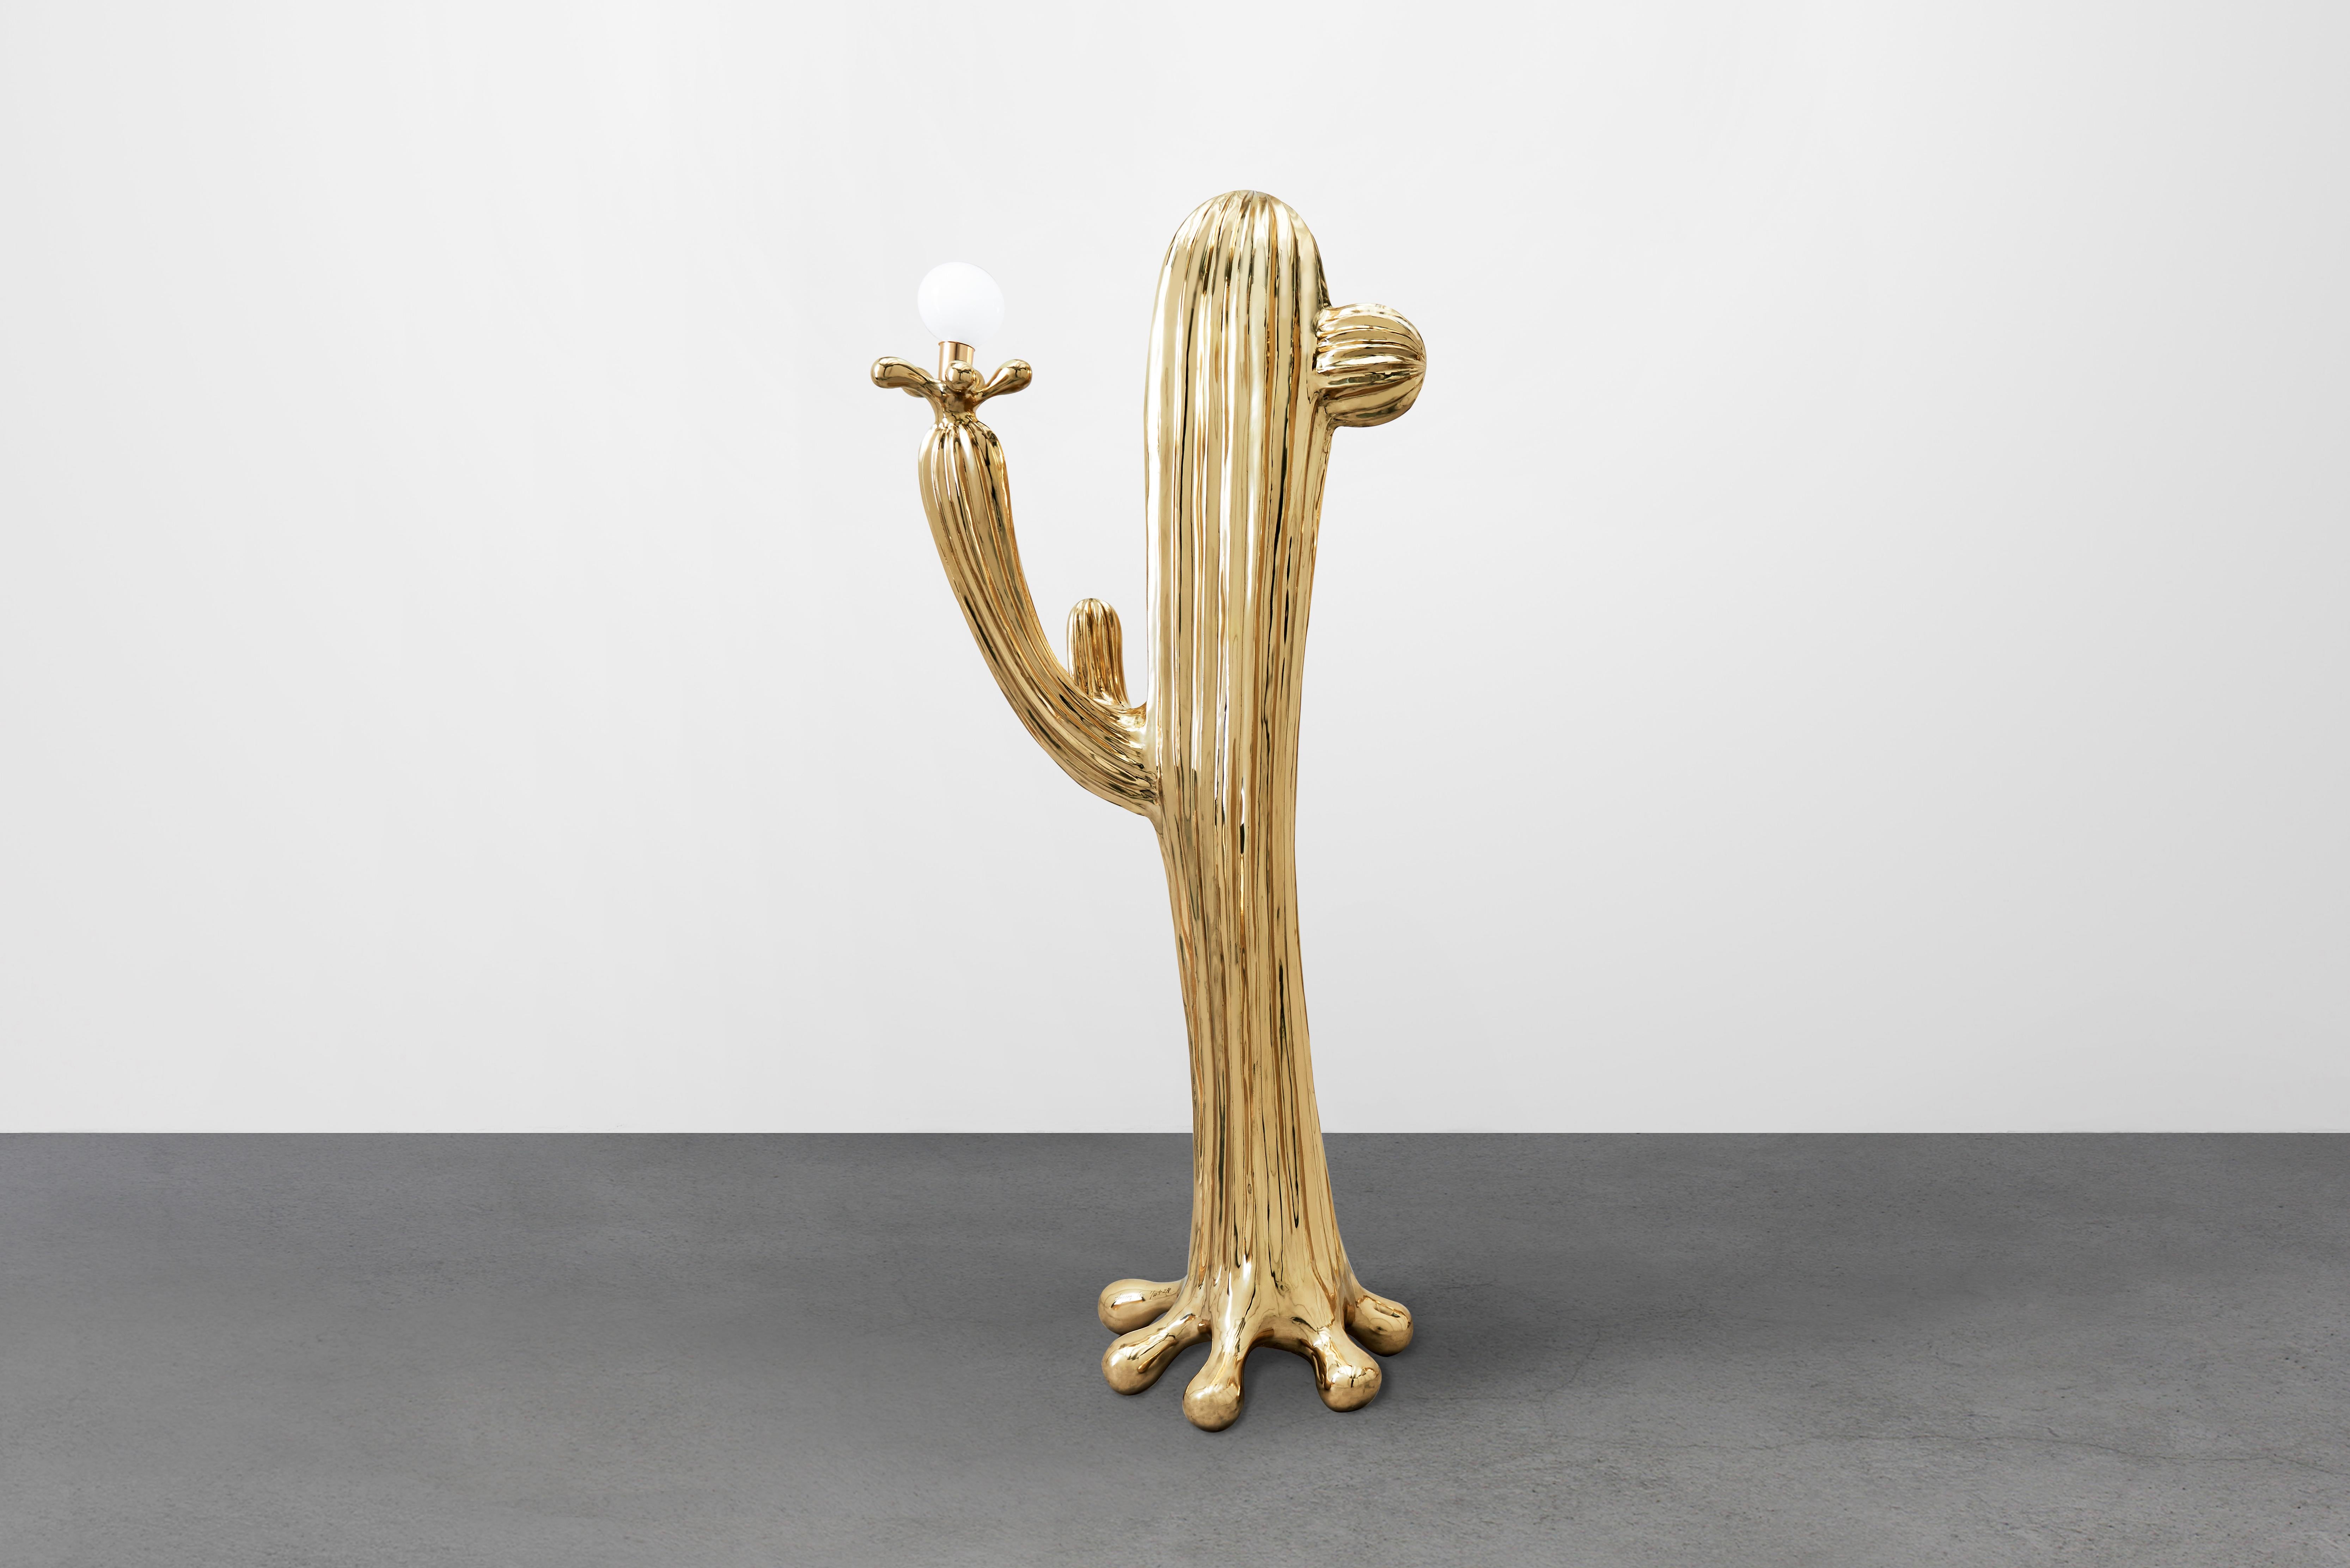 Chinese Saguaro No.2 Floor Lamp Polished Brass Gold by Zhipeng Tan For Sale